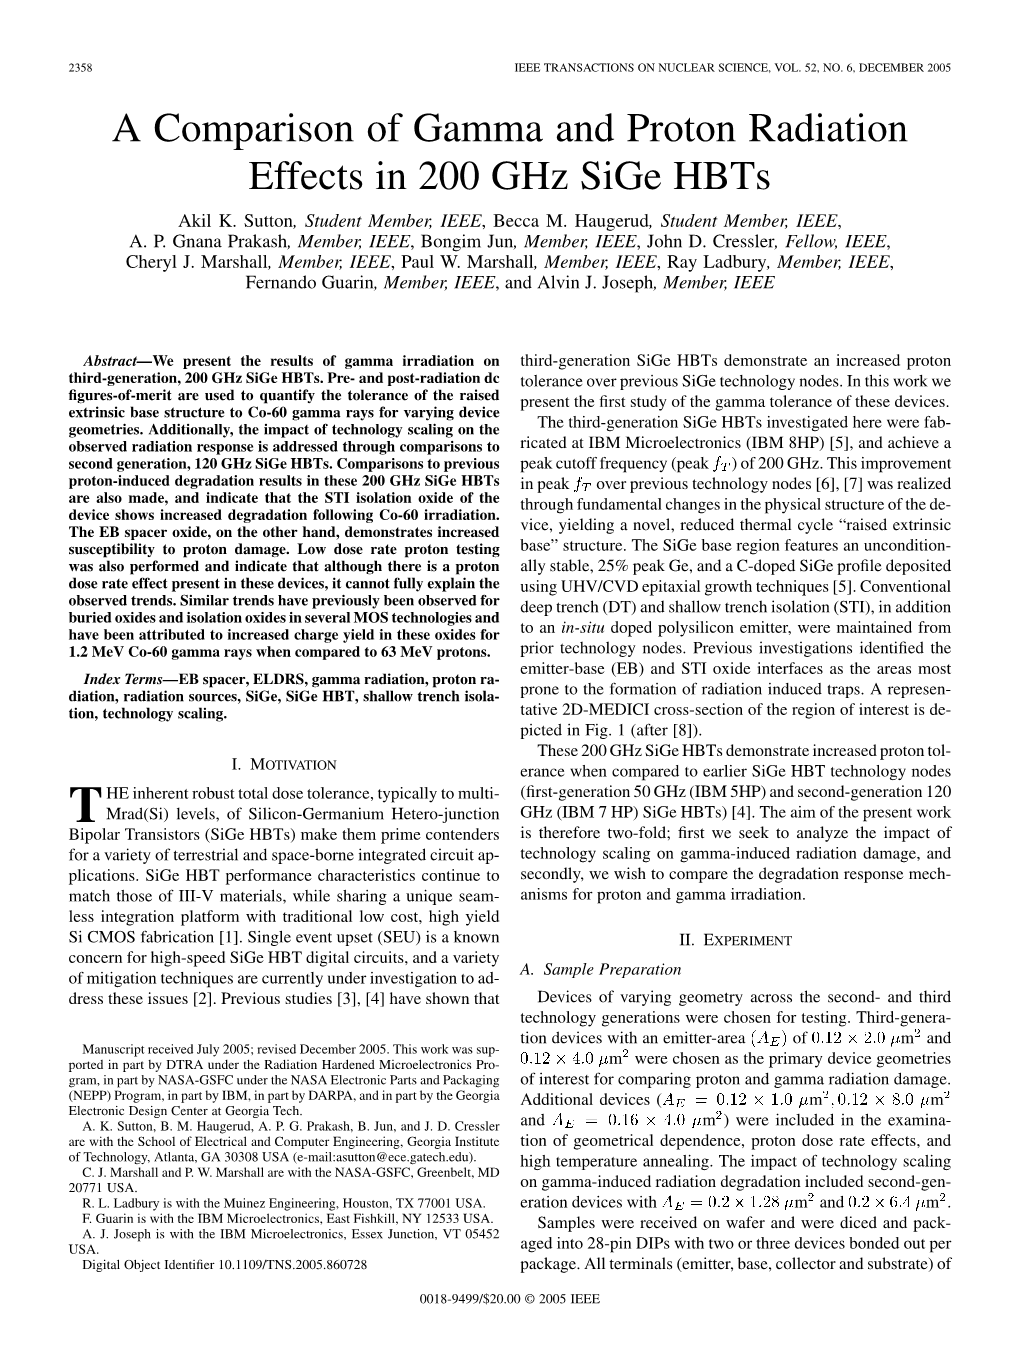 A Comparison of Gamma and Proton Radiation Effects in 200 Ghz Sige Hbts Akil K